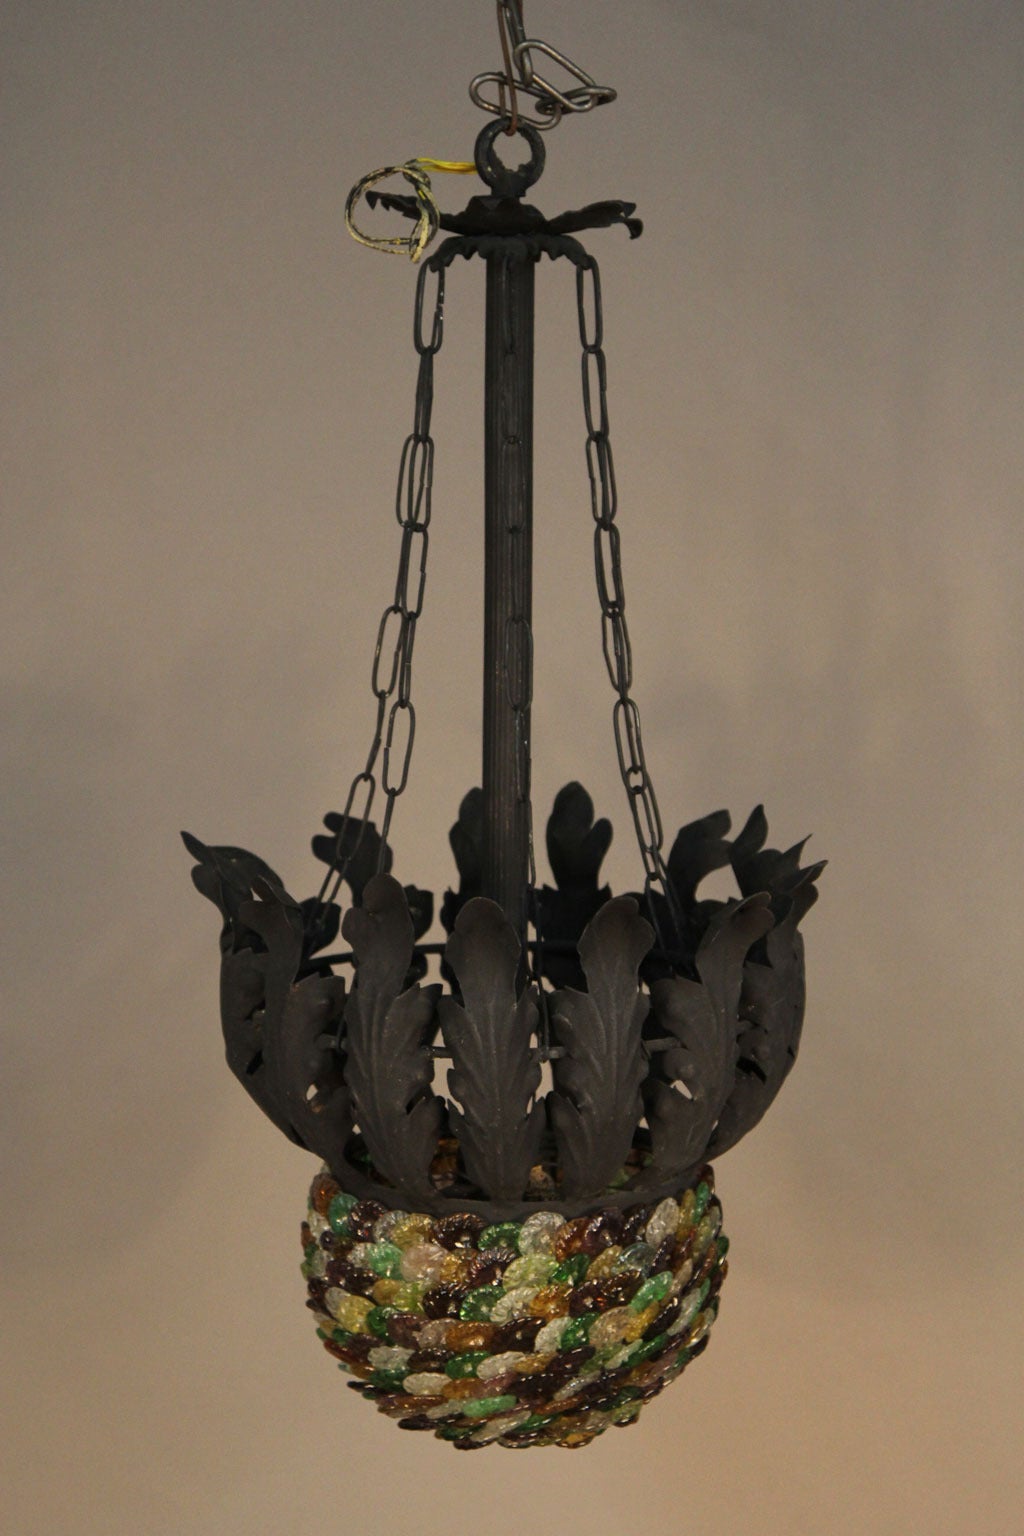 Rare matching pair of Archimede Seguso chandeliers, featuring handblown glass flowers in shades of green, purple, amber and clear, wired to a basket (approximately 10 inches in diameter and 6 inches deep). 
Each basket is affixed to a black metal